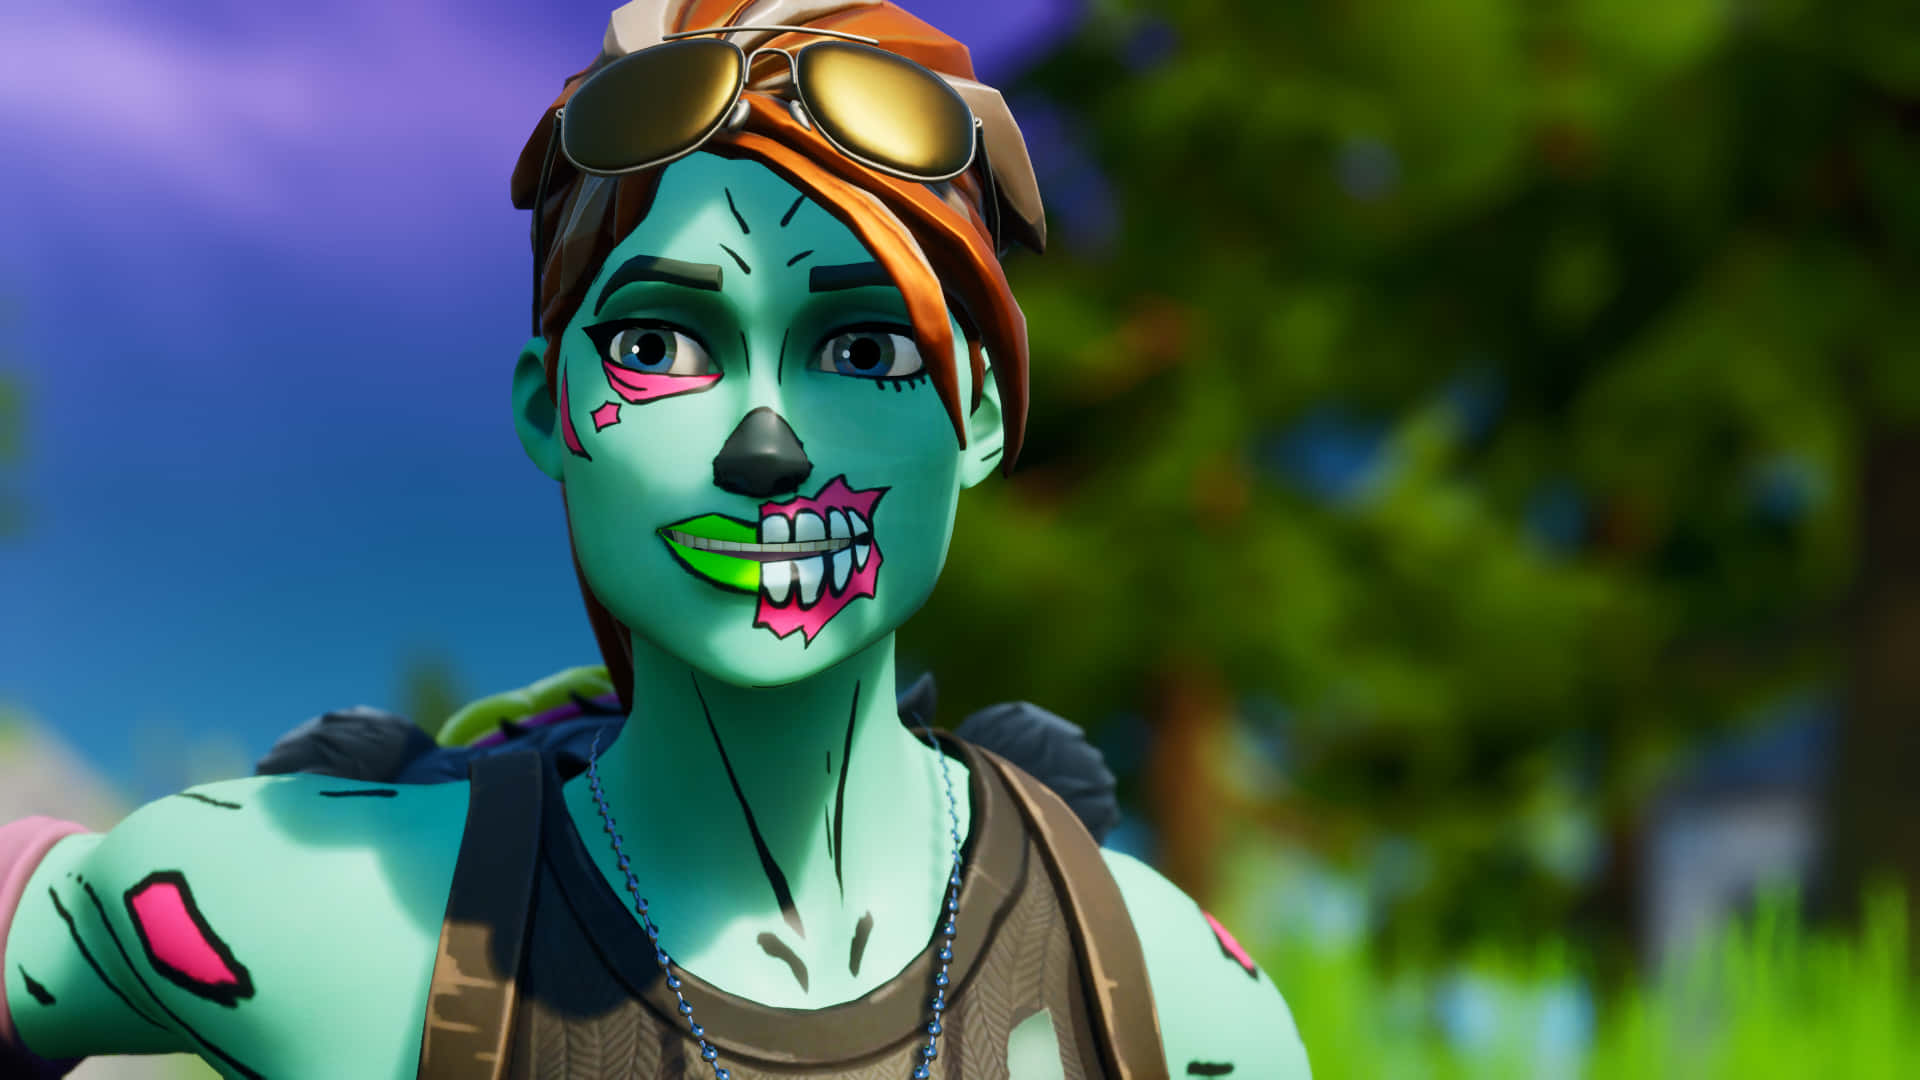 Fortnite Zombies - A Zombie With A Green Face Wallpaper